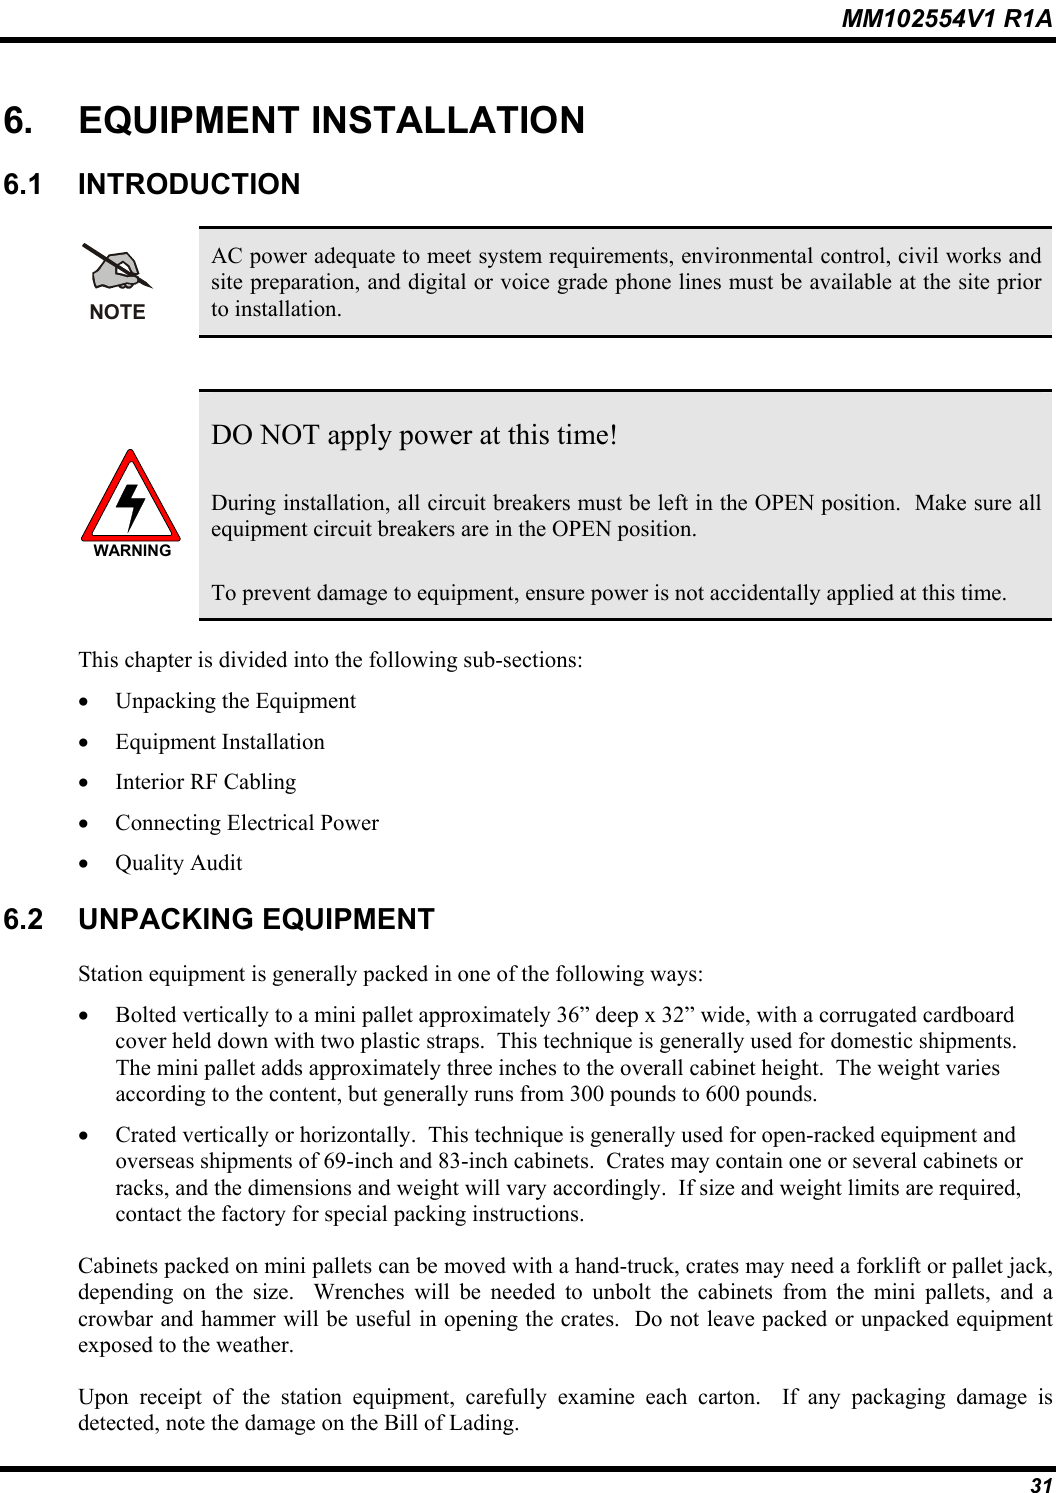 MM102554V1 R1A  31 6. EQUIPMENT INSTALLATION 6.1 INTRODUCTION NOTE AC power adequate to meet system requirements, environmental control, civil works and site preparation, and digital or voice grade phone lines must be available at the site prior to installation.  WARNING DO NOT apply power at this time! During installation, all circuit breakers must be left in the OPEN position.  Make sure all equipment circuit breakers are in the OPEN position.   To prevent damage to equipment, ensure power is not accidentally applied at this time.  This chapter is divided into the following sub-sections: •  Unpacking the Equipment •  Equipment Installation  •  Interior RF Cabling •  Connecting Electrical Power •  Quality Audit 6.2 UNPACKING EQUIPMENT Station equipment is generally packed in one of the following ways: •  Bolted vertically to a mini pallet approximately 36” deep x 32” wide, with a corrugated cardboard cover held down with two plastic straps.  This technique is generally used for domestic shipments.  The mini pallet adds approximately three inches to the overall cabinet height.  The weight varies according to the content, but generally runs from 300 pounds to 600 pounds. •  Crated vertically or horizontally.  This technique is generally used for open-racked equipment and overseas shipments of 69-inch and 83-inch cabinets.  Crates may contain one or several cabinets or racks, and the dimensions and weight will vary accordingly.  If size and weight limits are required, contact the factory for special packing instructions. Cabinets packed on mini pallets can be moved with a hand-truck, crates may need a forklift or pallet jack, depending on the size.  Wrenches will be needed to unbolt the cabinets from the mini pallets, and a crowbar and hammer will be useful in opening the crates.  Do not leave packed or unpacked equipment exposed to the weather. Upon receipt of the station equipment, carefully examine each carton.  If any packaging damage is detected, note the damage on the Bill of Lading. 